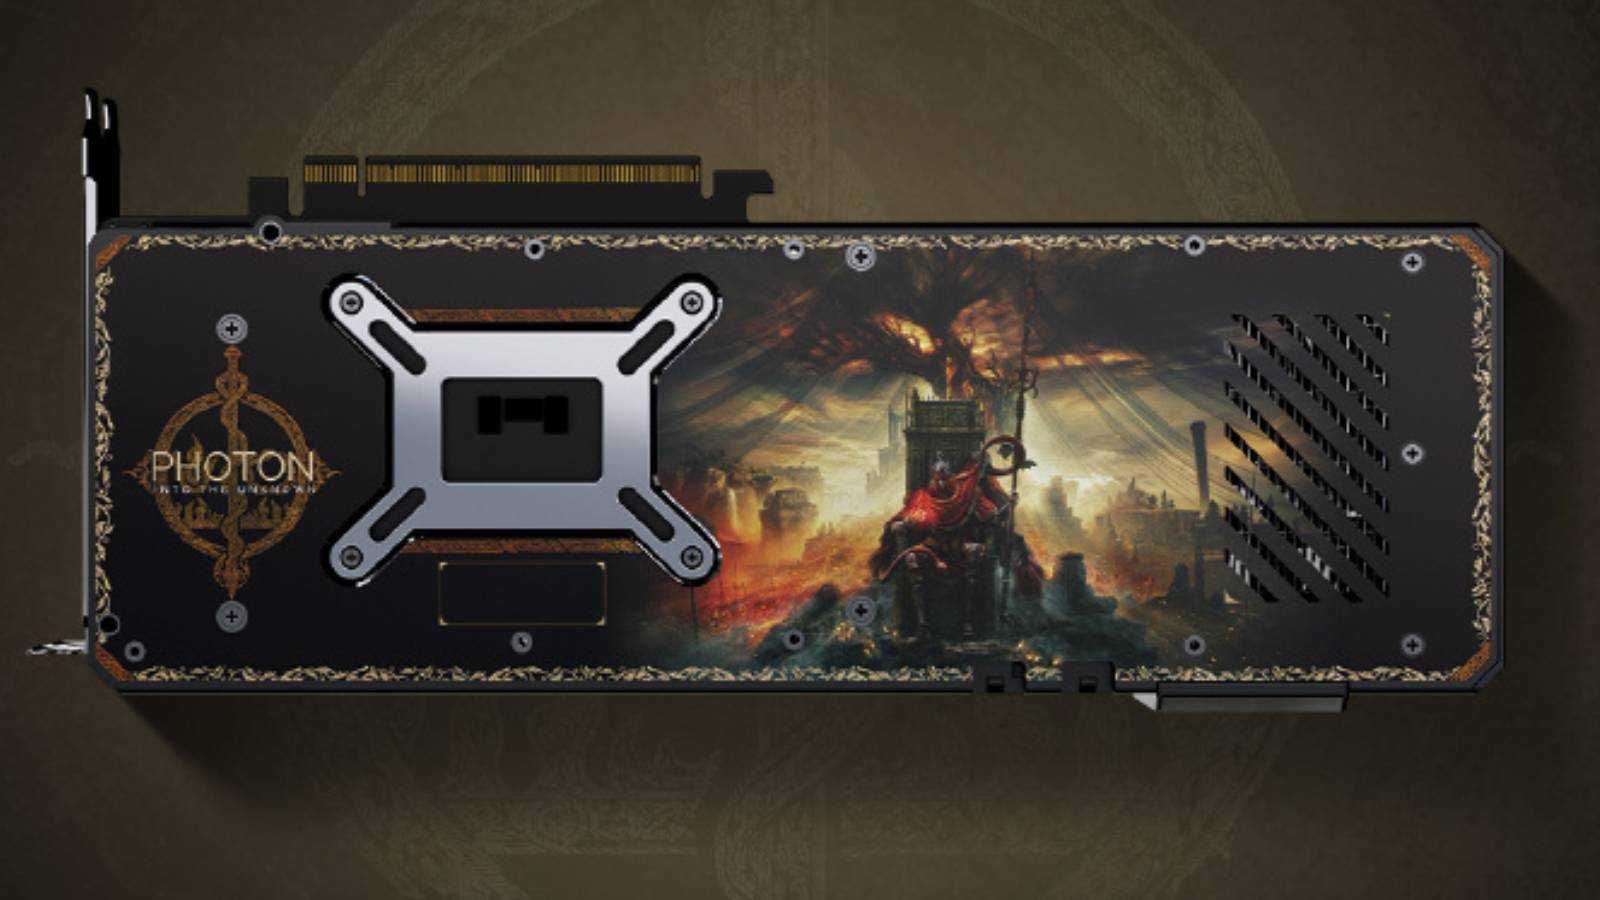 Image of the backplate of the Gunnir official Elden Ring graphics card.